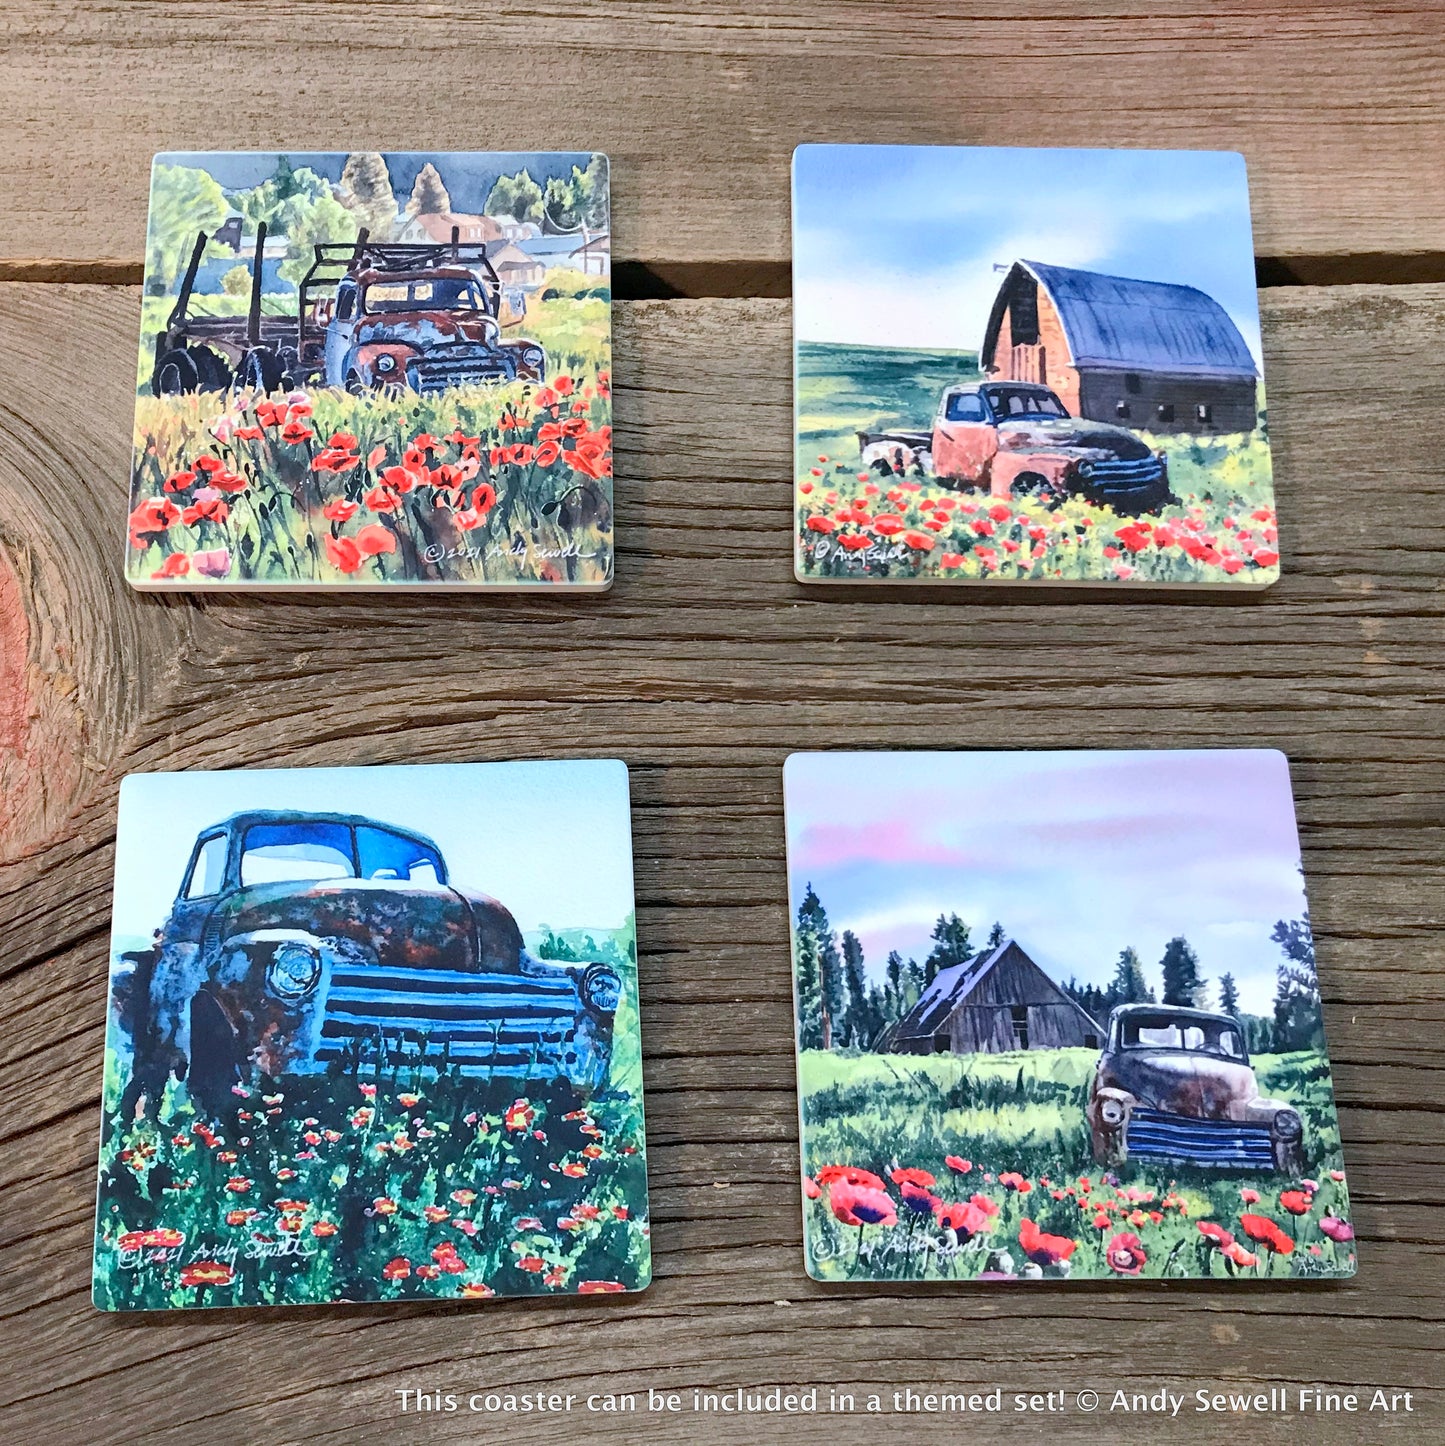 ASC221 “ Chevy in the poppies“ ceramic coaster